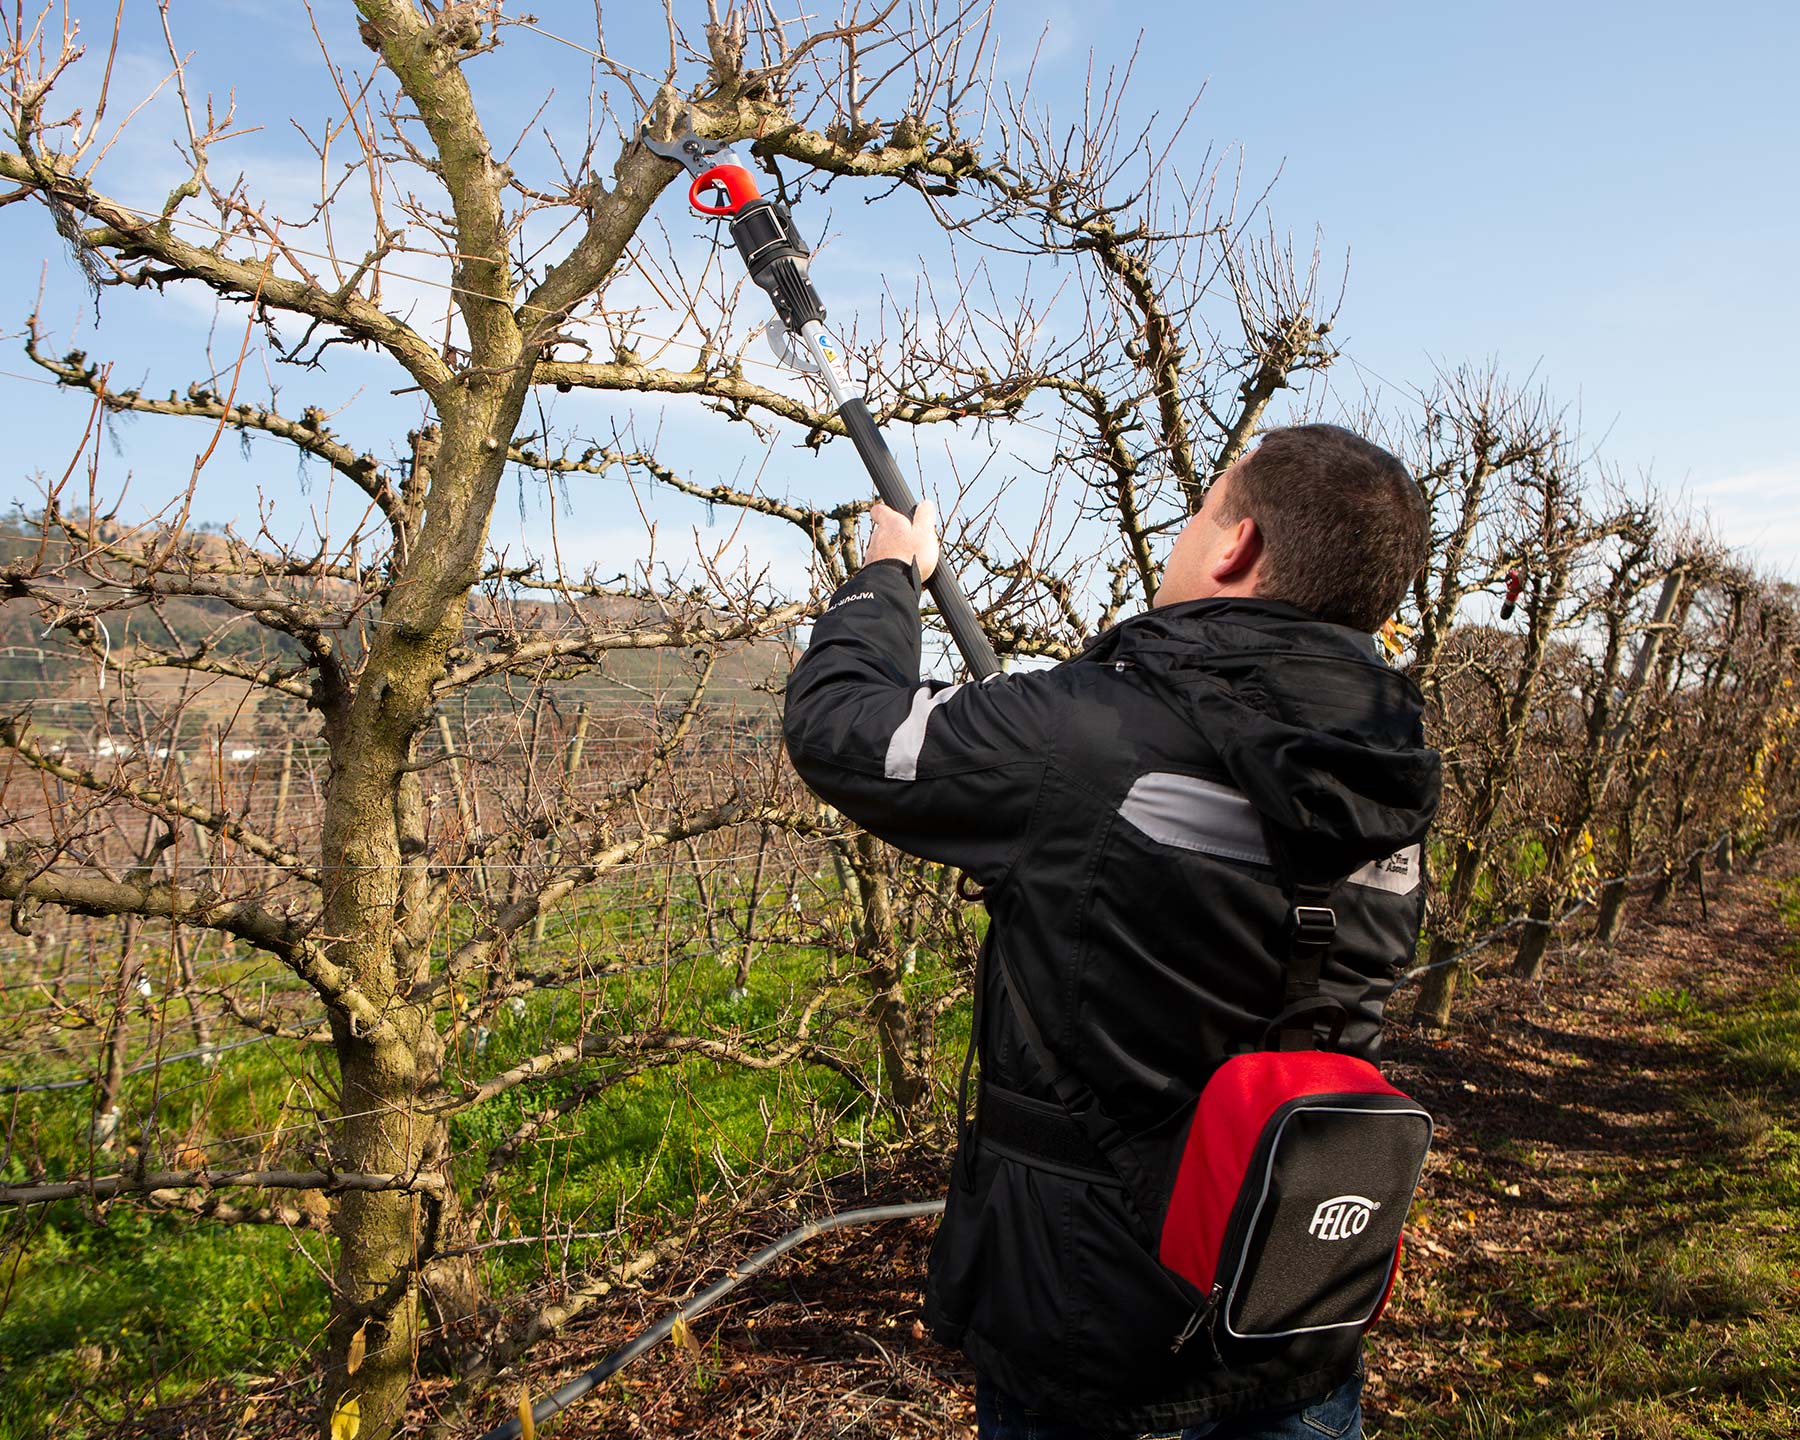 Felco 822 Powerblade electric pruning shears - the extension pole makes pruning higher branches quick and efficient